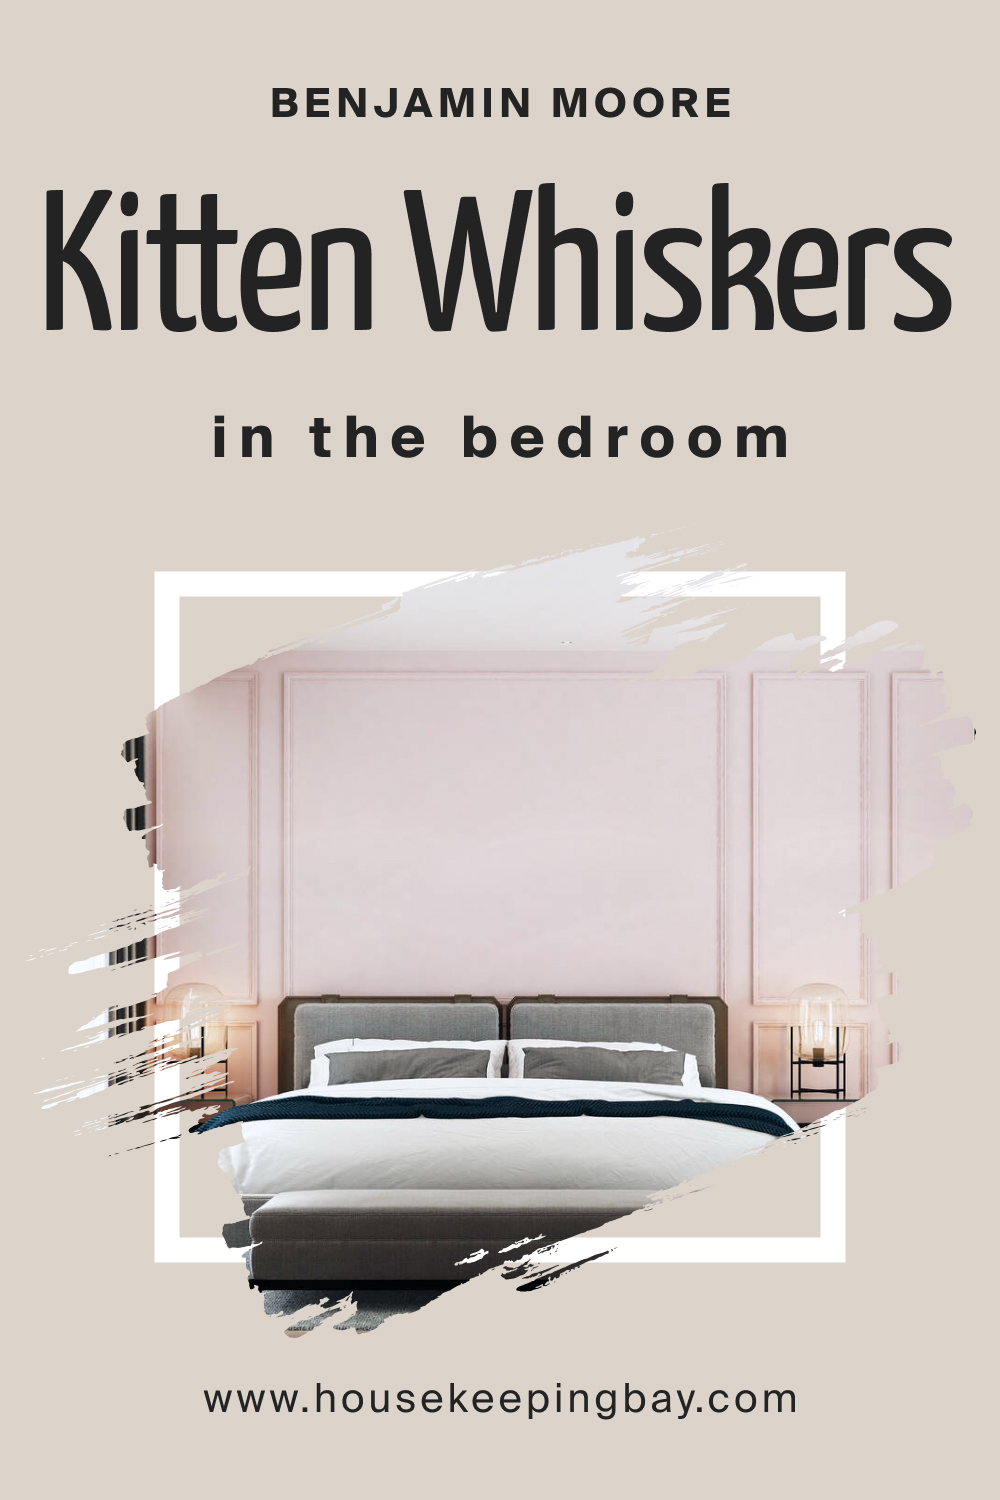 How to Use BM Kitten Whiskers 1003 in the Bedroom?